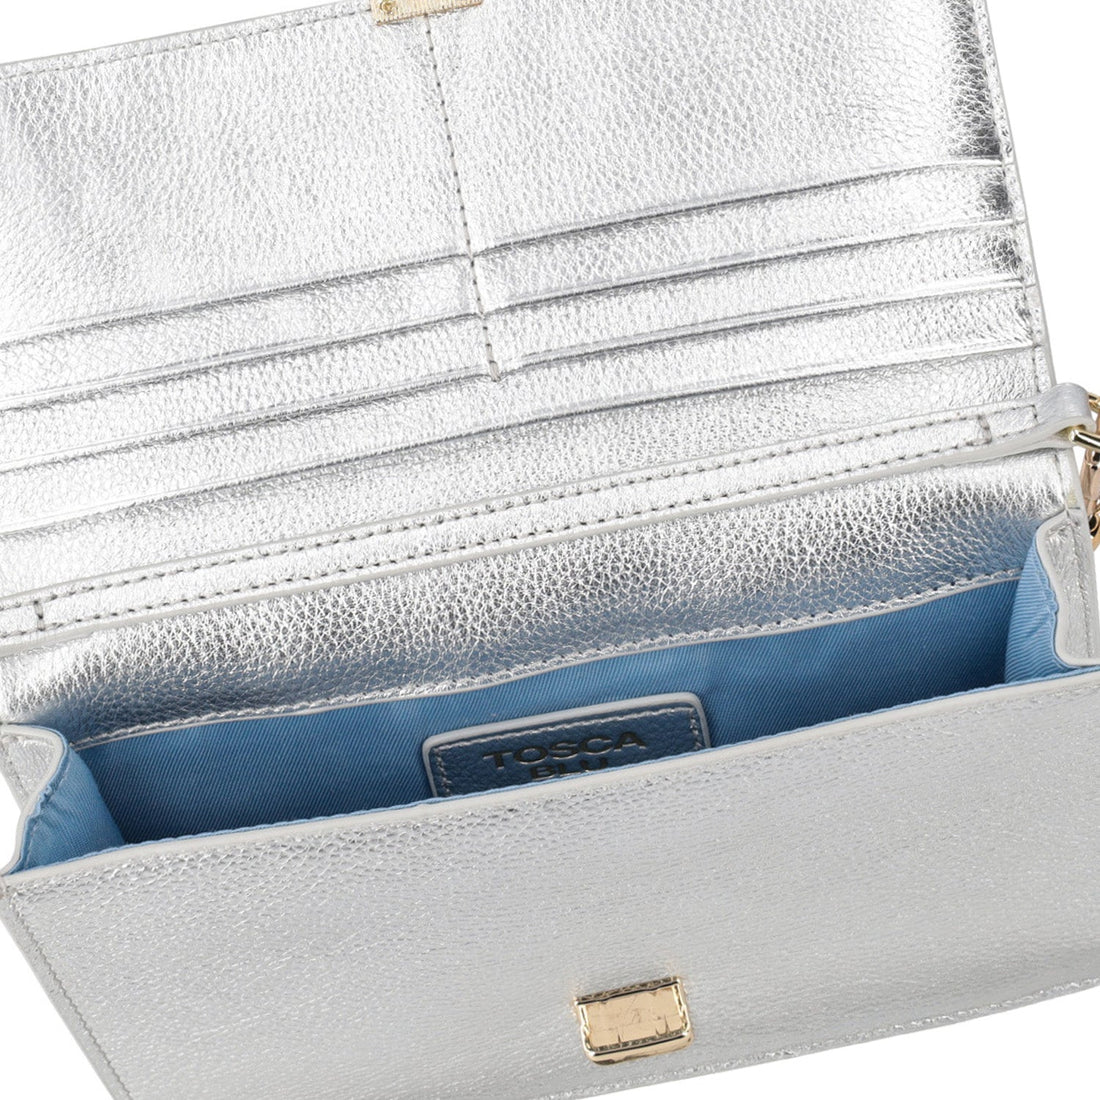 SILVER GIN TONIC LEATHER BAG